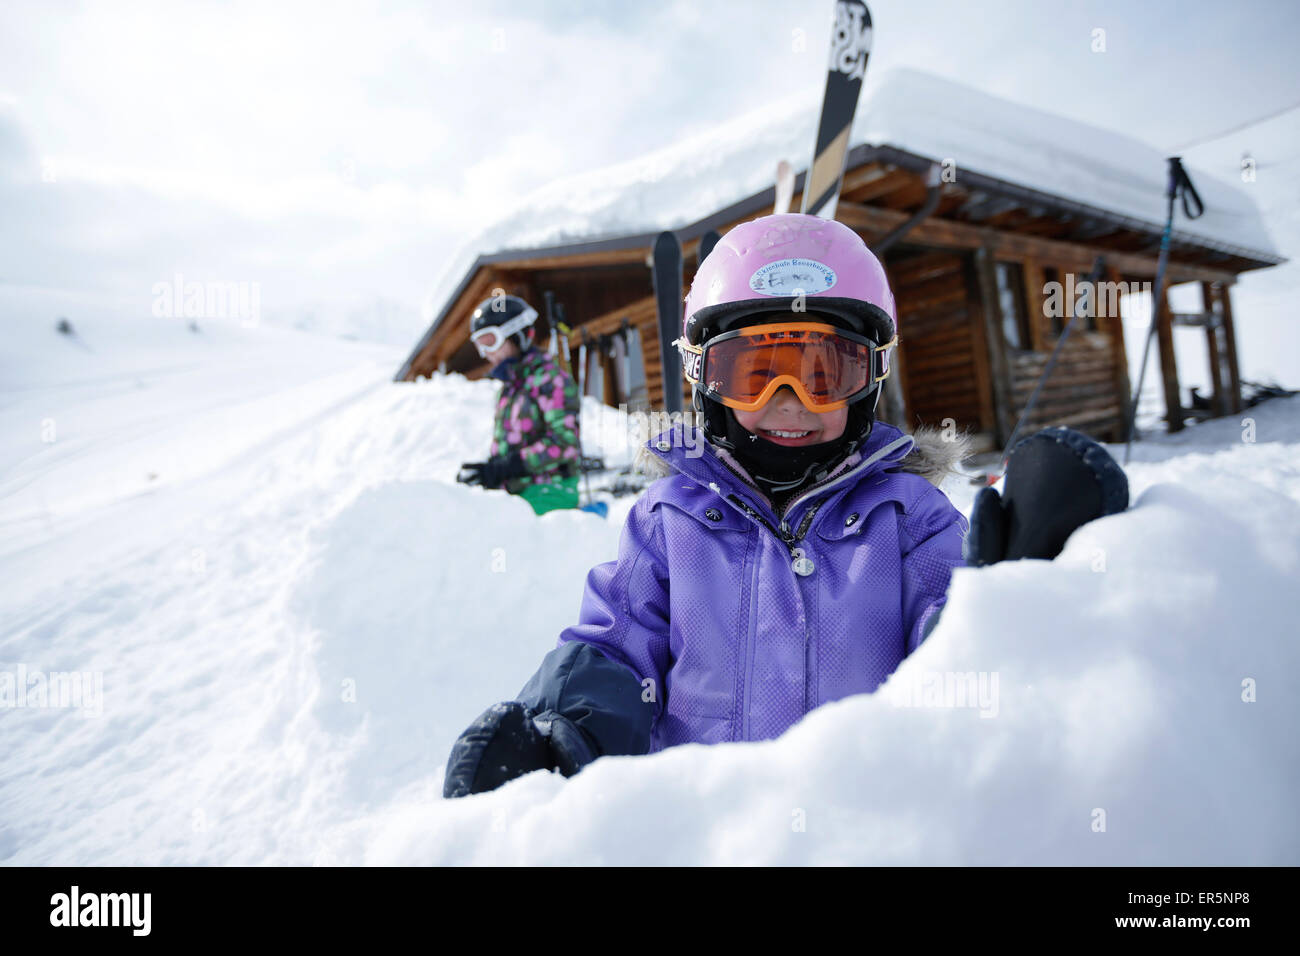 Two children in snow in front of a hut, ski resort Ladurns, Gossensass, South Tyrol, Italy Stock Photo